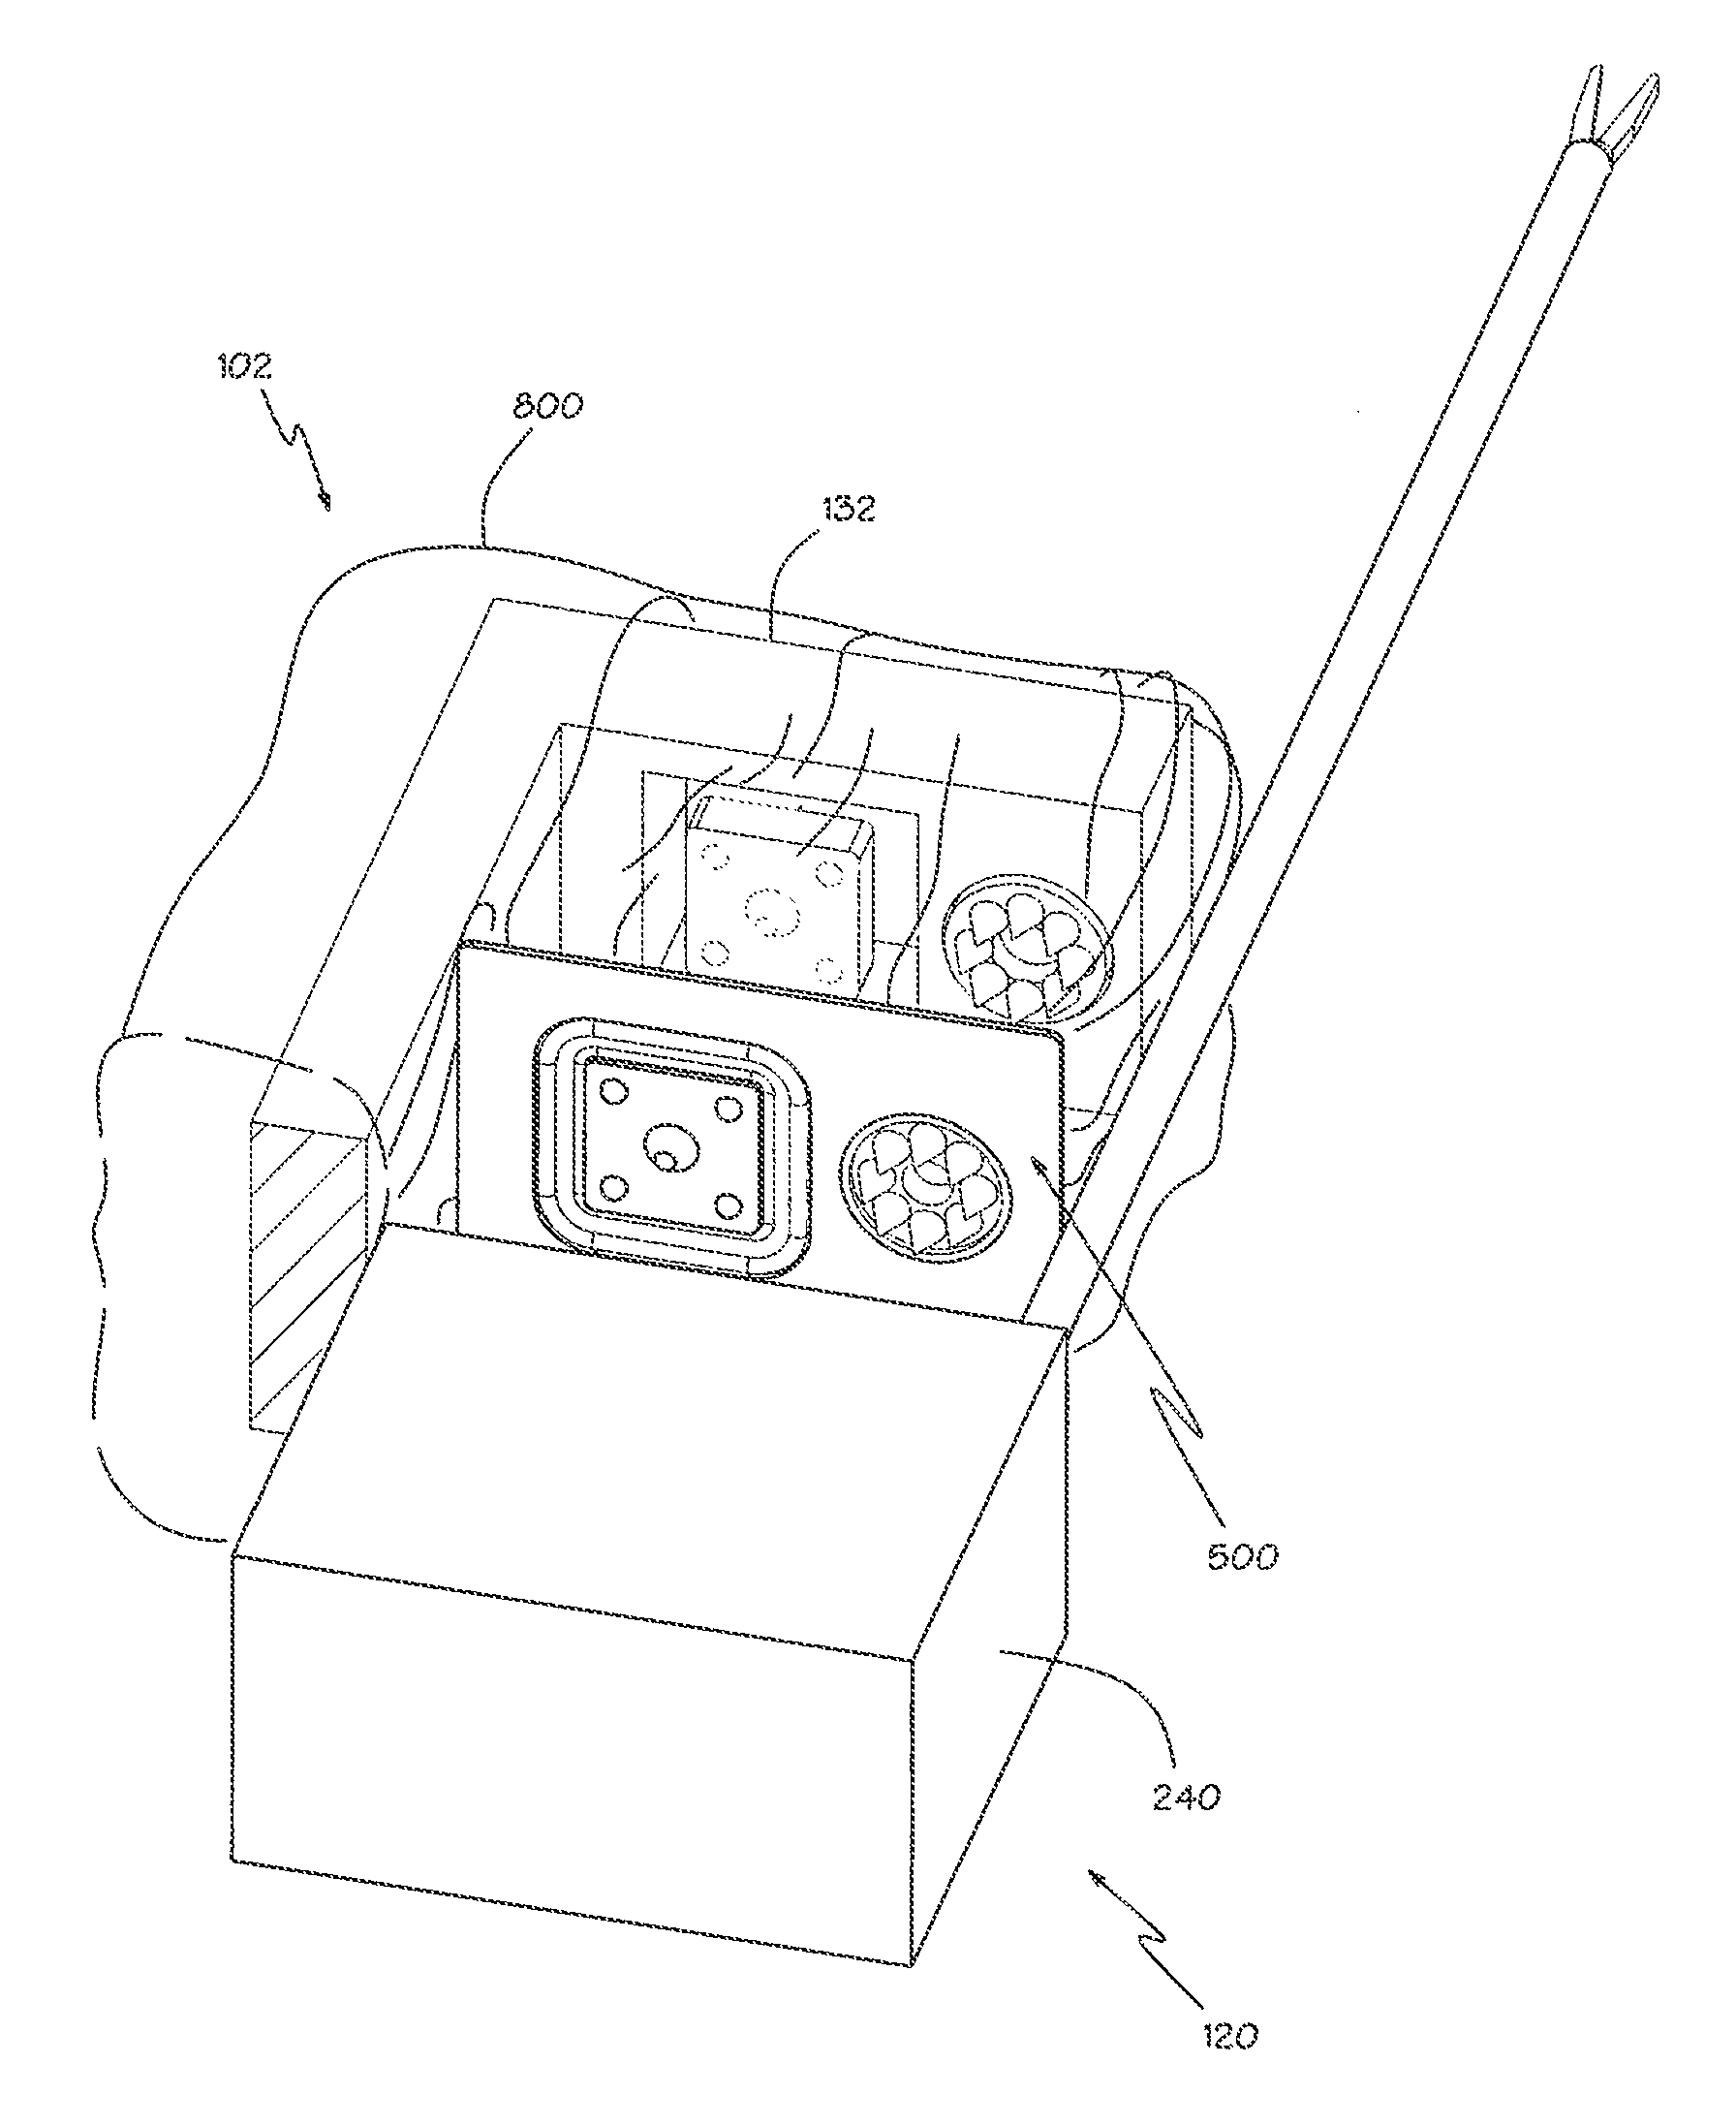 Sterile drape interface for robotic surgical instrument